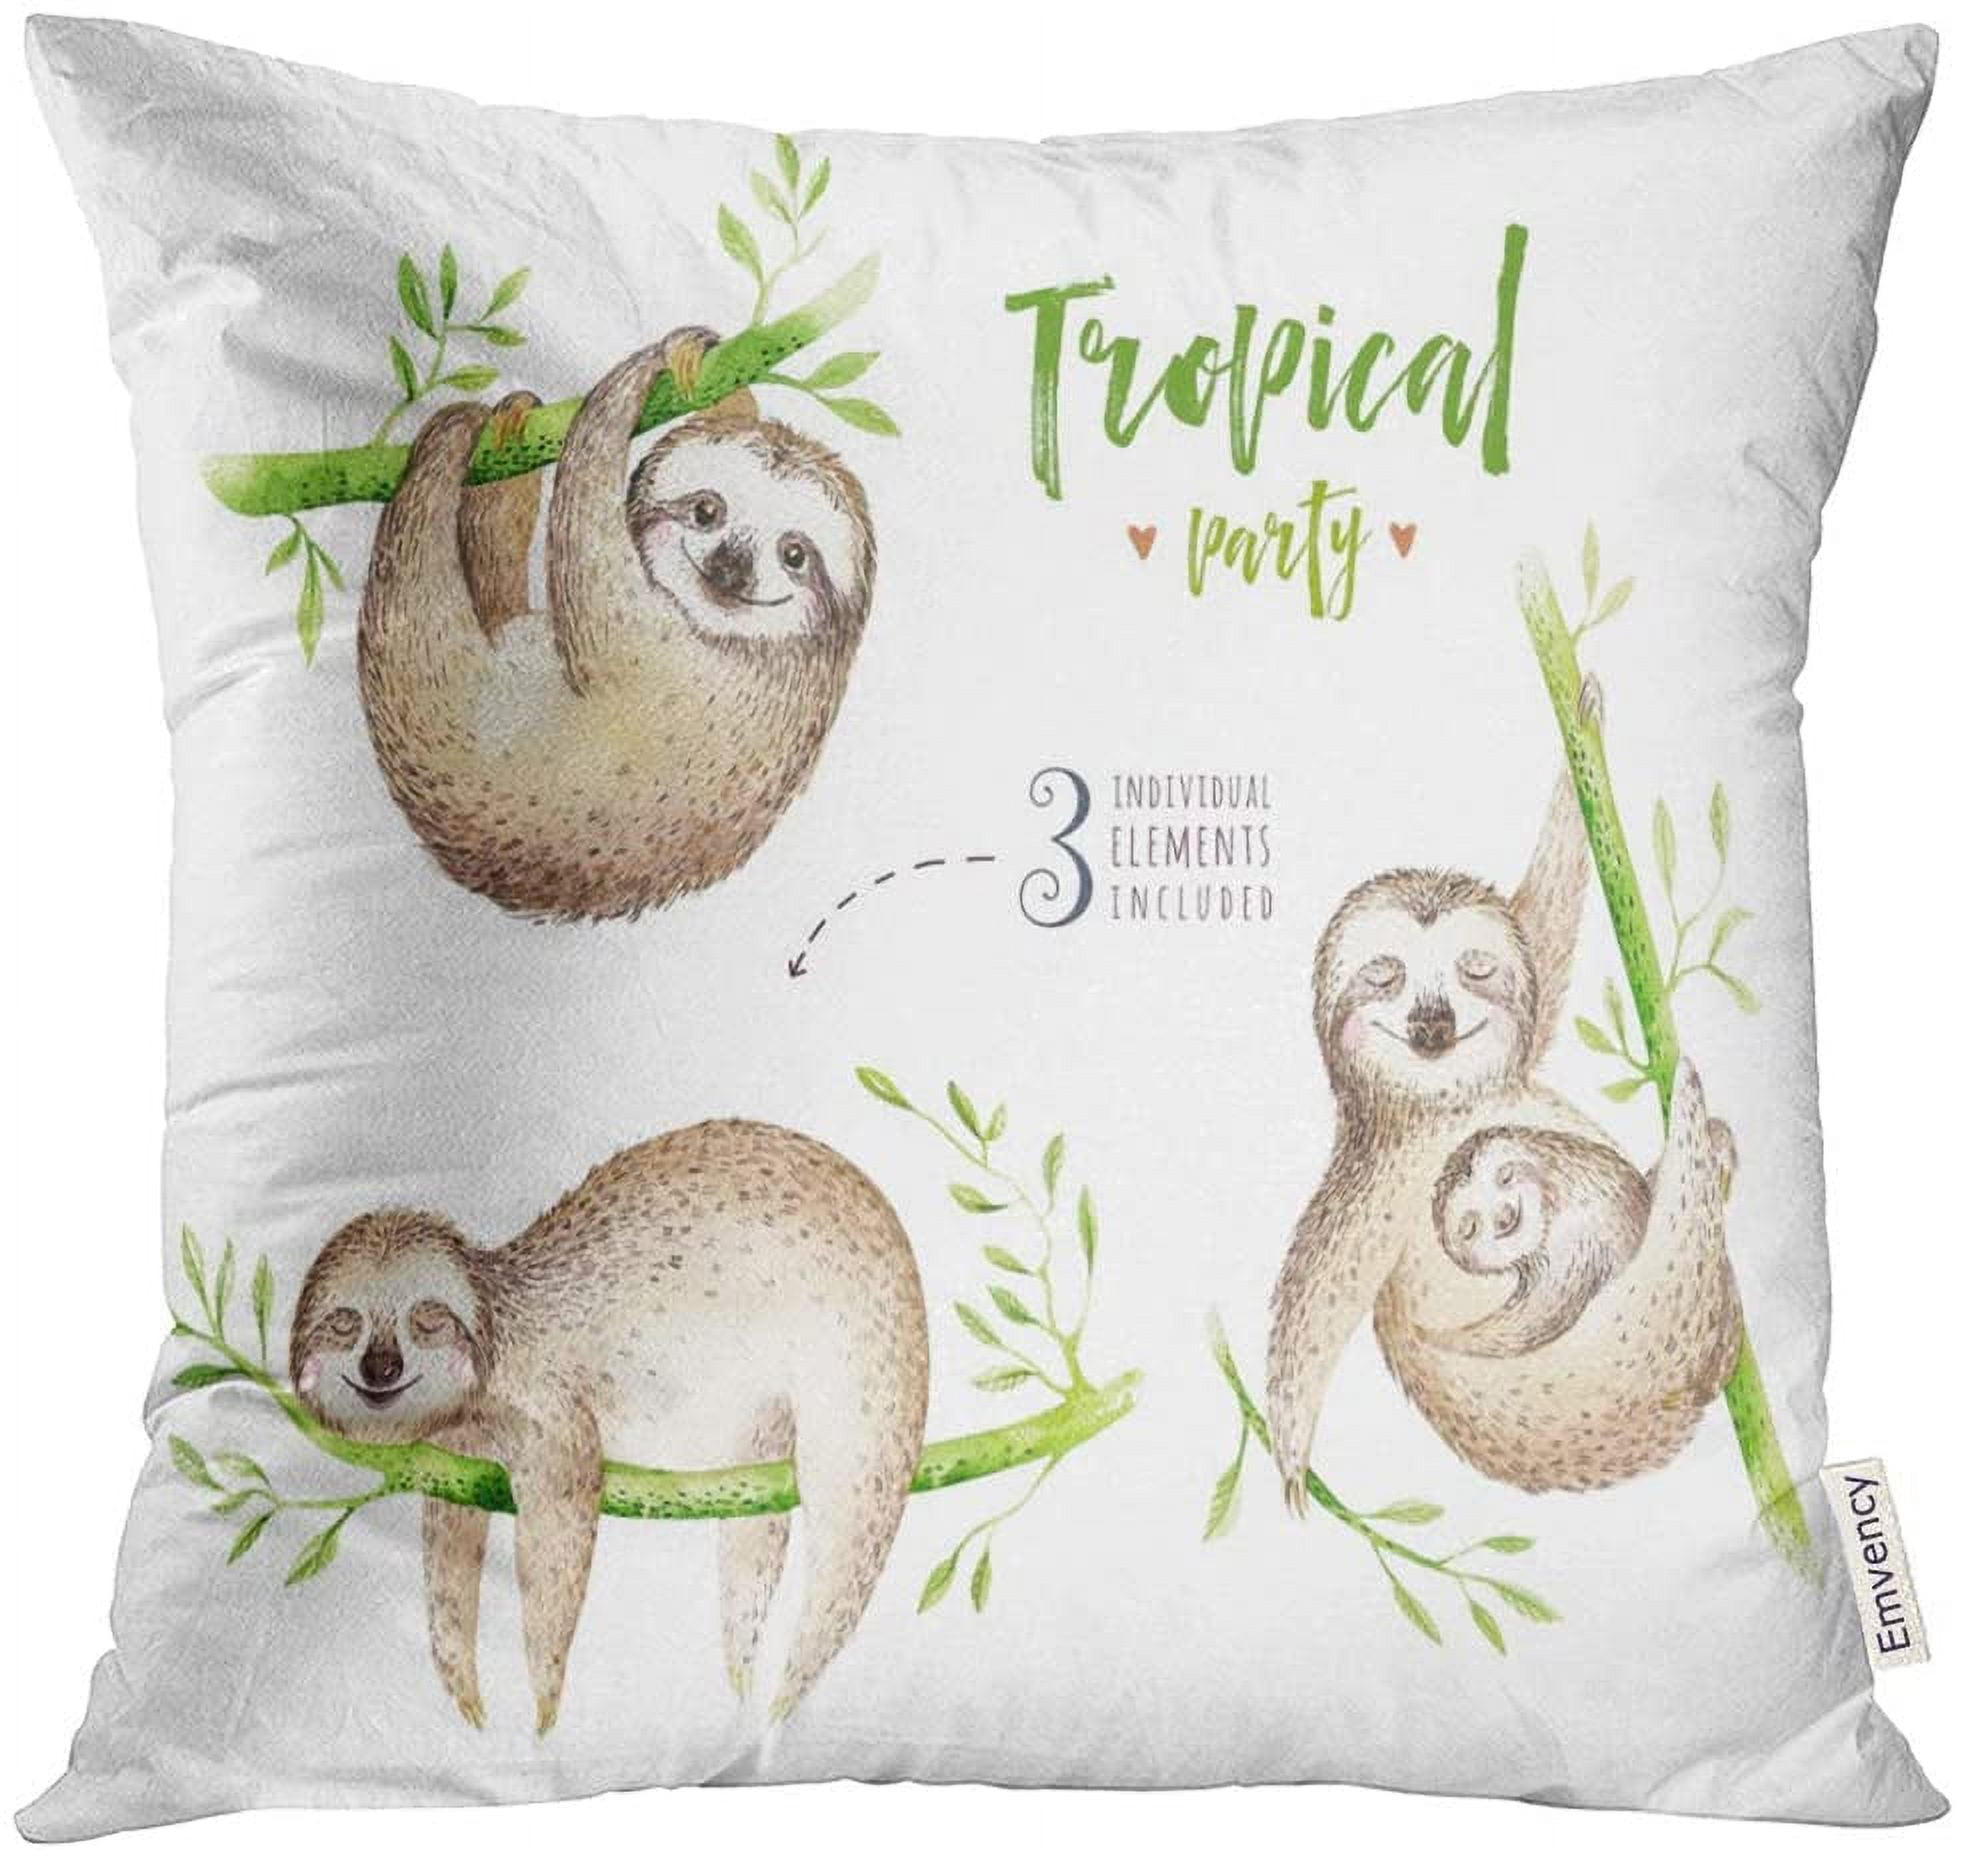 Sloth Latch Hook Kits DIY Throw Pillow Cover Crochet Crafts Cushion Covers  for Beginner Kids and